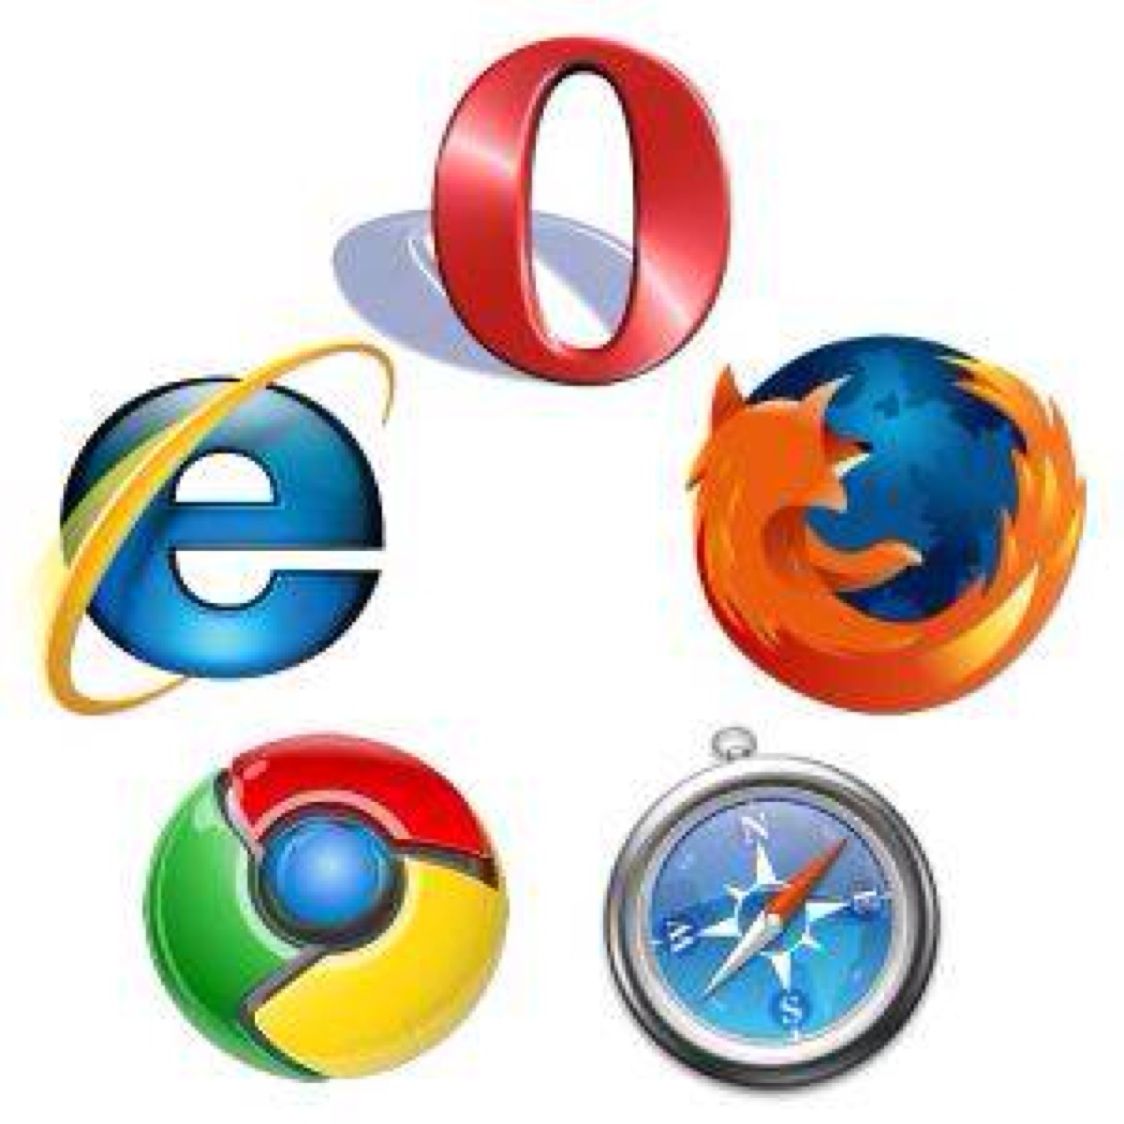 The most secure web browser according to NSS Labs